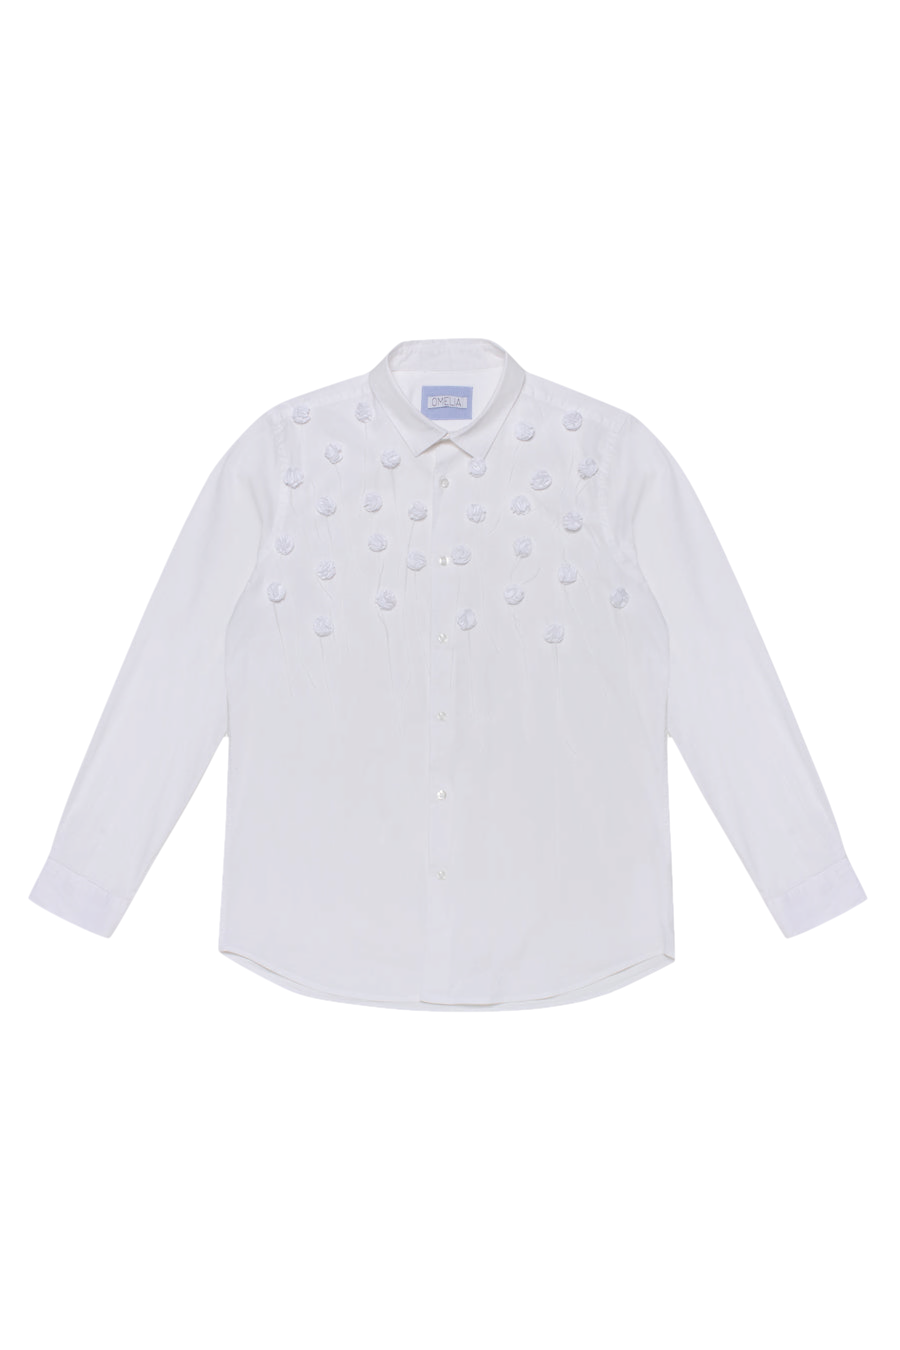 Omelia Redesigned Shirt 84 W In White